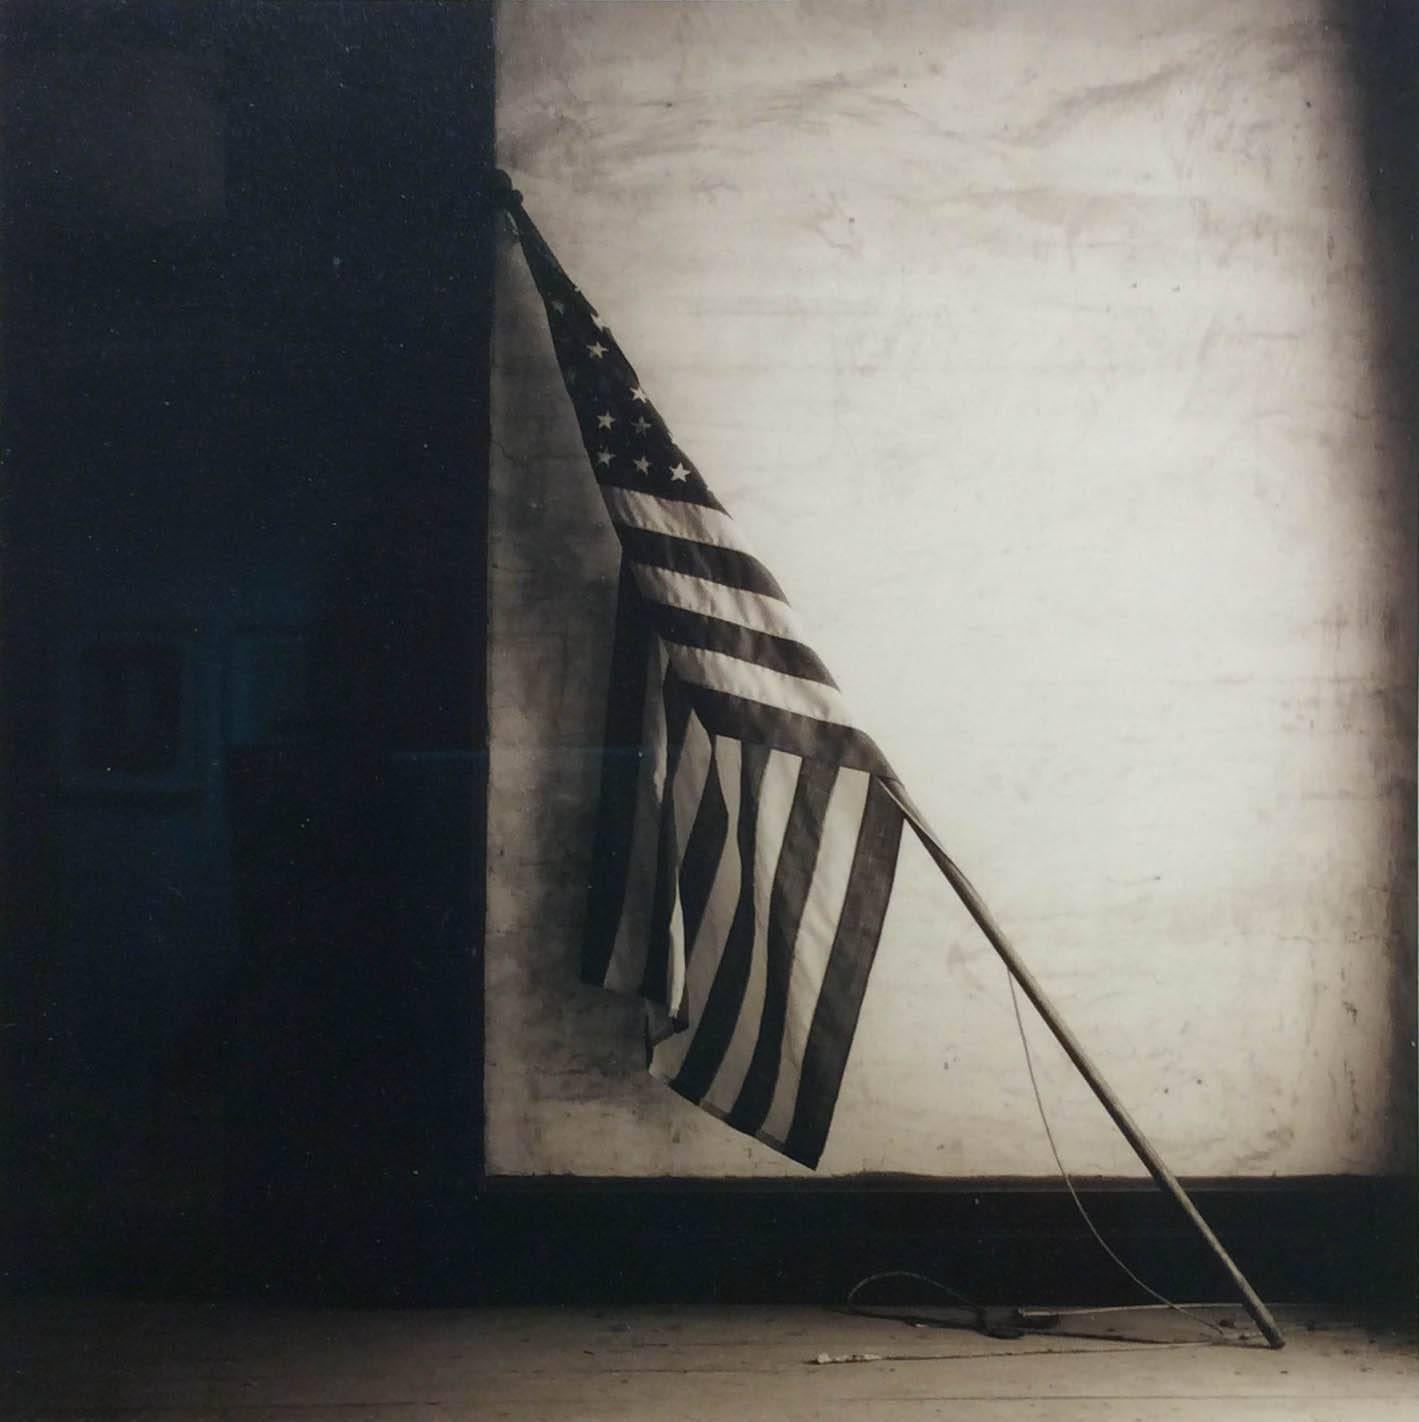 American Flag (Sepia Toned Still Life of Vintage Flag Leaning Against Wall)